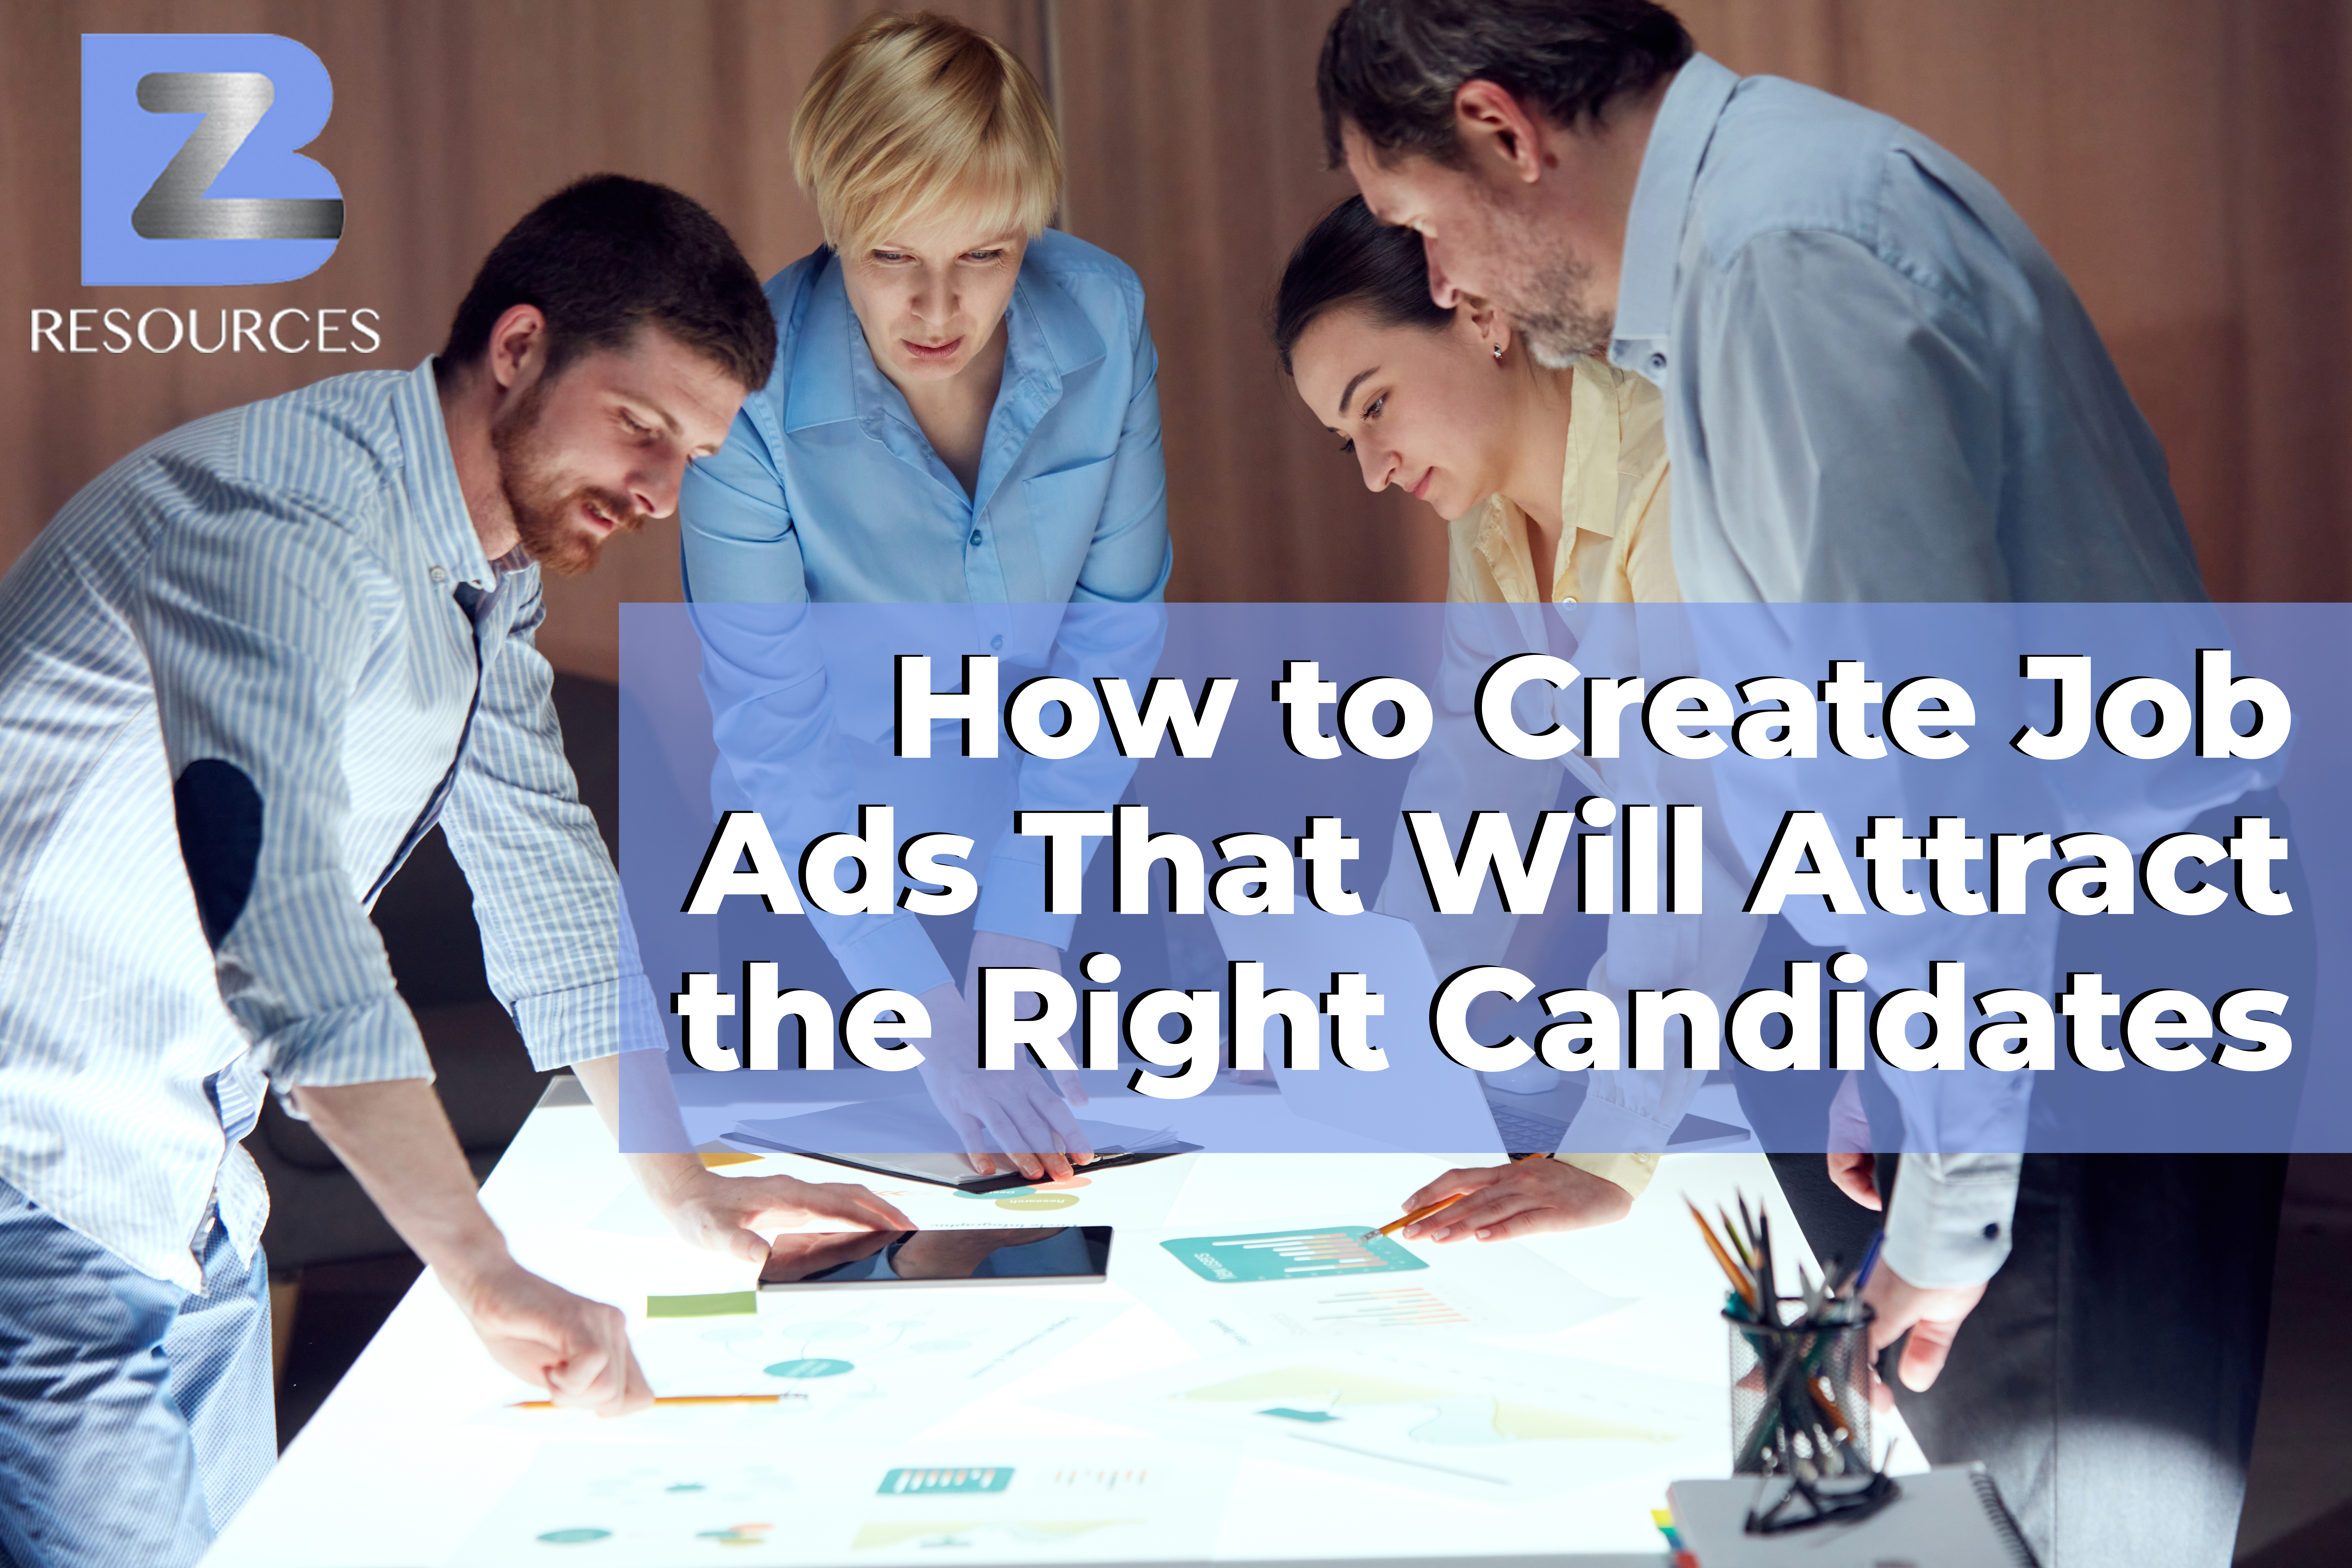 How to Create Job Ads That Will Attract the Right Candidates